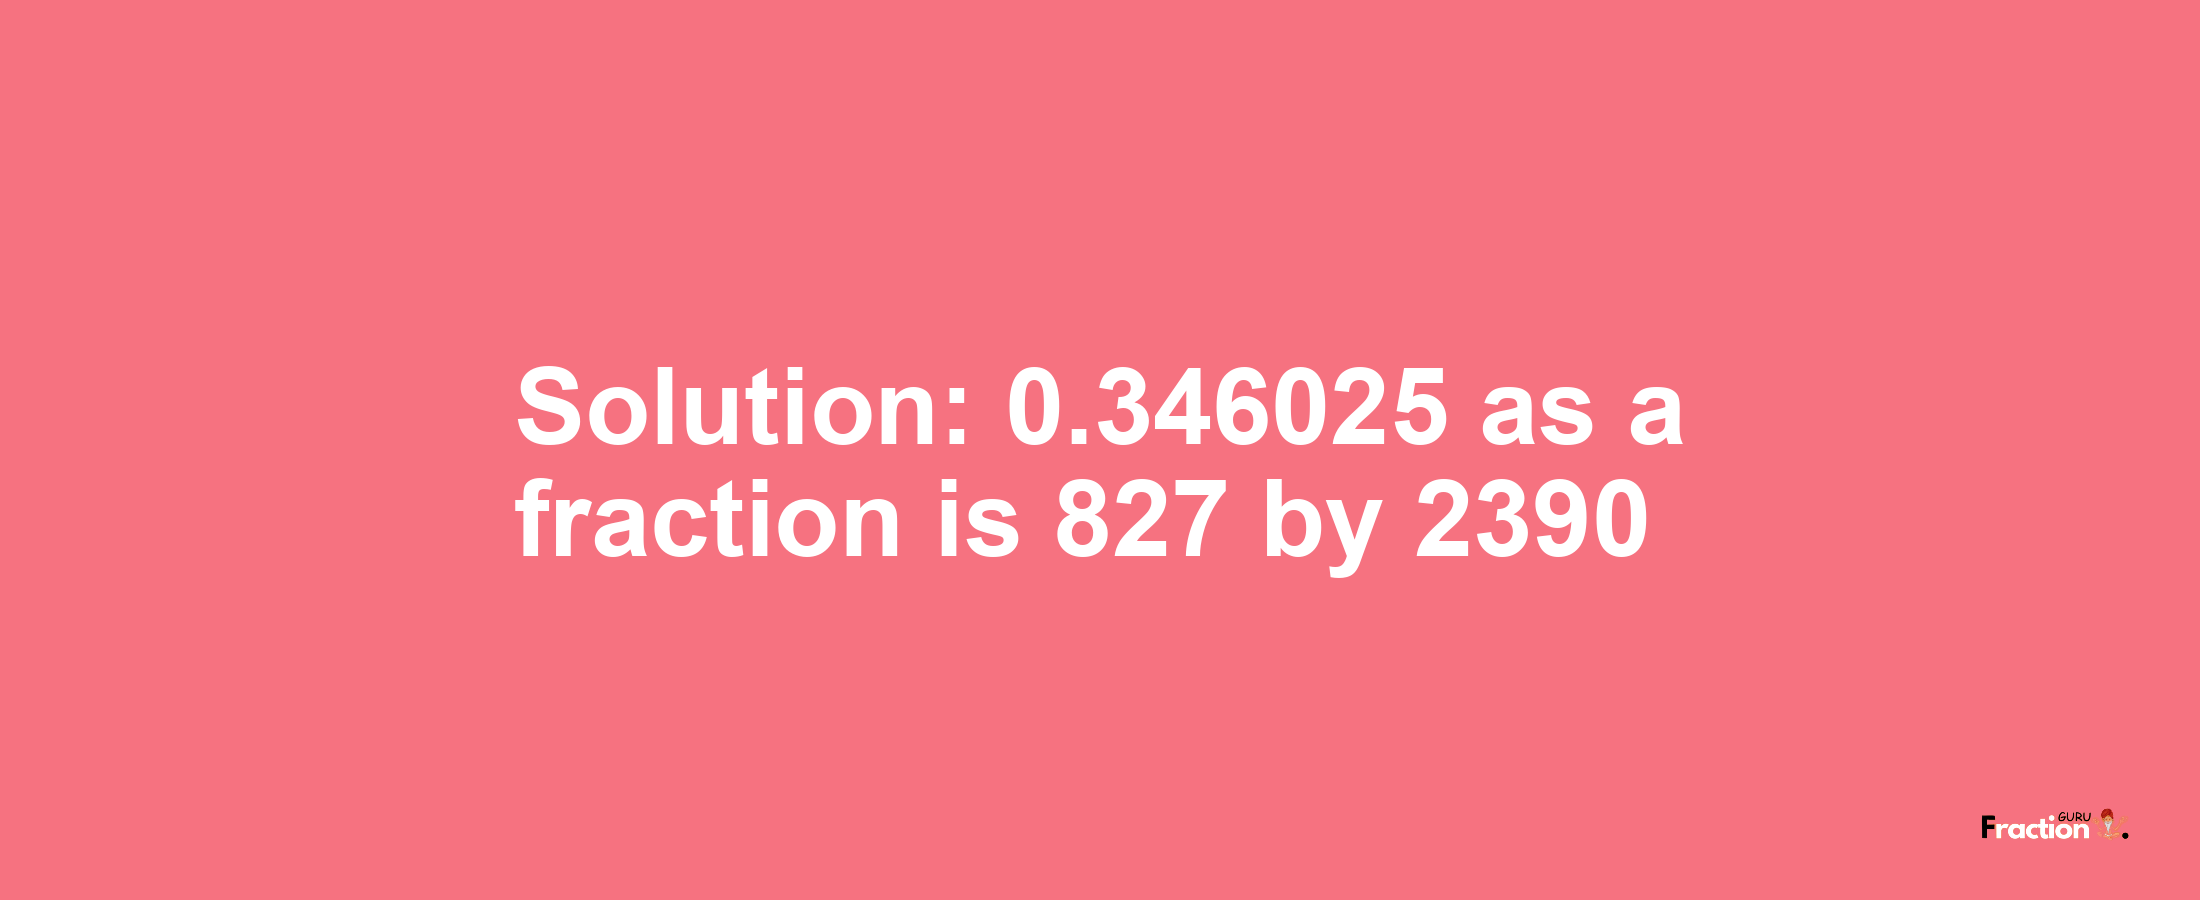 Solution:0.346025 as a fraction is 827/2390